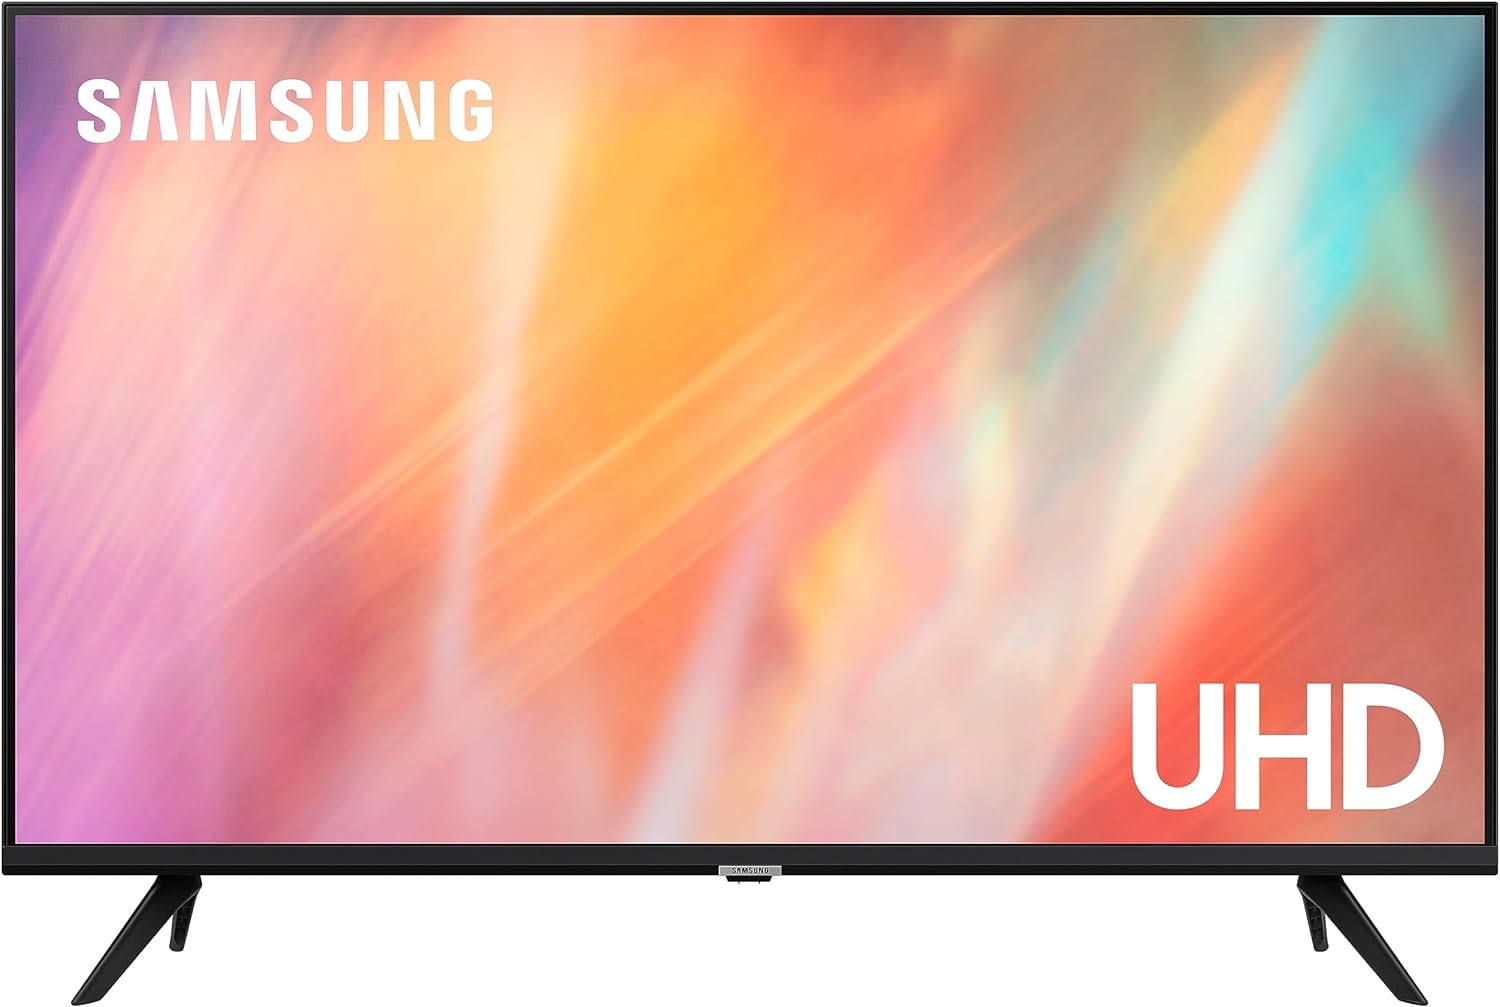 Samsung 55 Inch AU7020 UHD HDR 4K Smart TV (2023) - Crystal UHD 4K Smart TV With HDR Picture, Adaptive Sound Lite, PurColour Colour Technology & Q - Symphony Sound - Compatible With Alexa - Amazing Gadgets Outlet